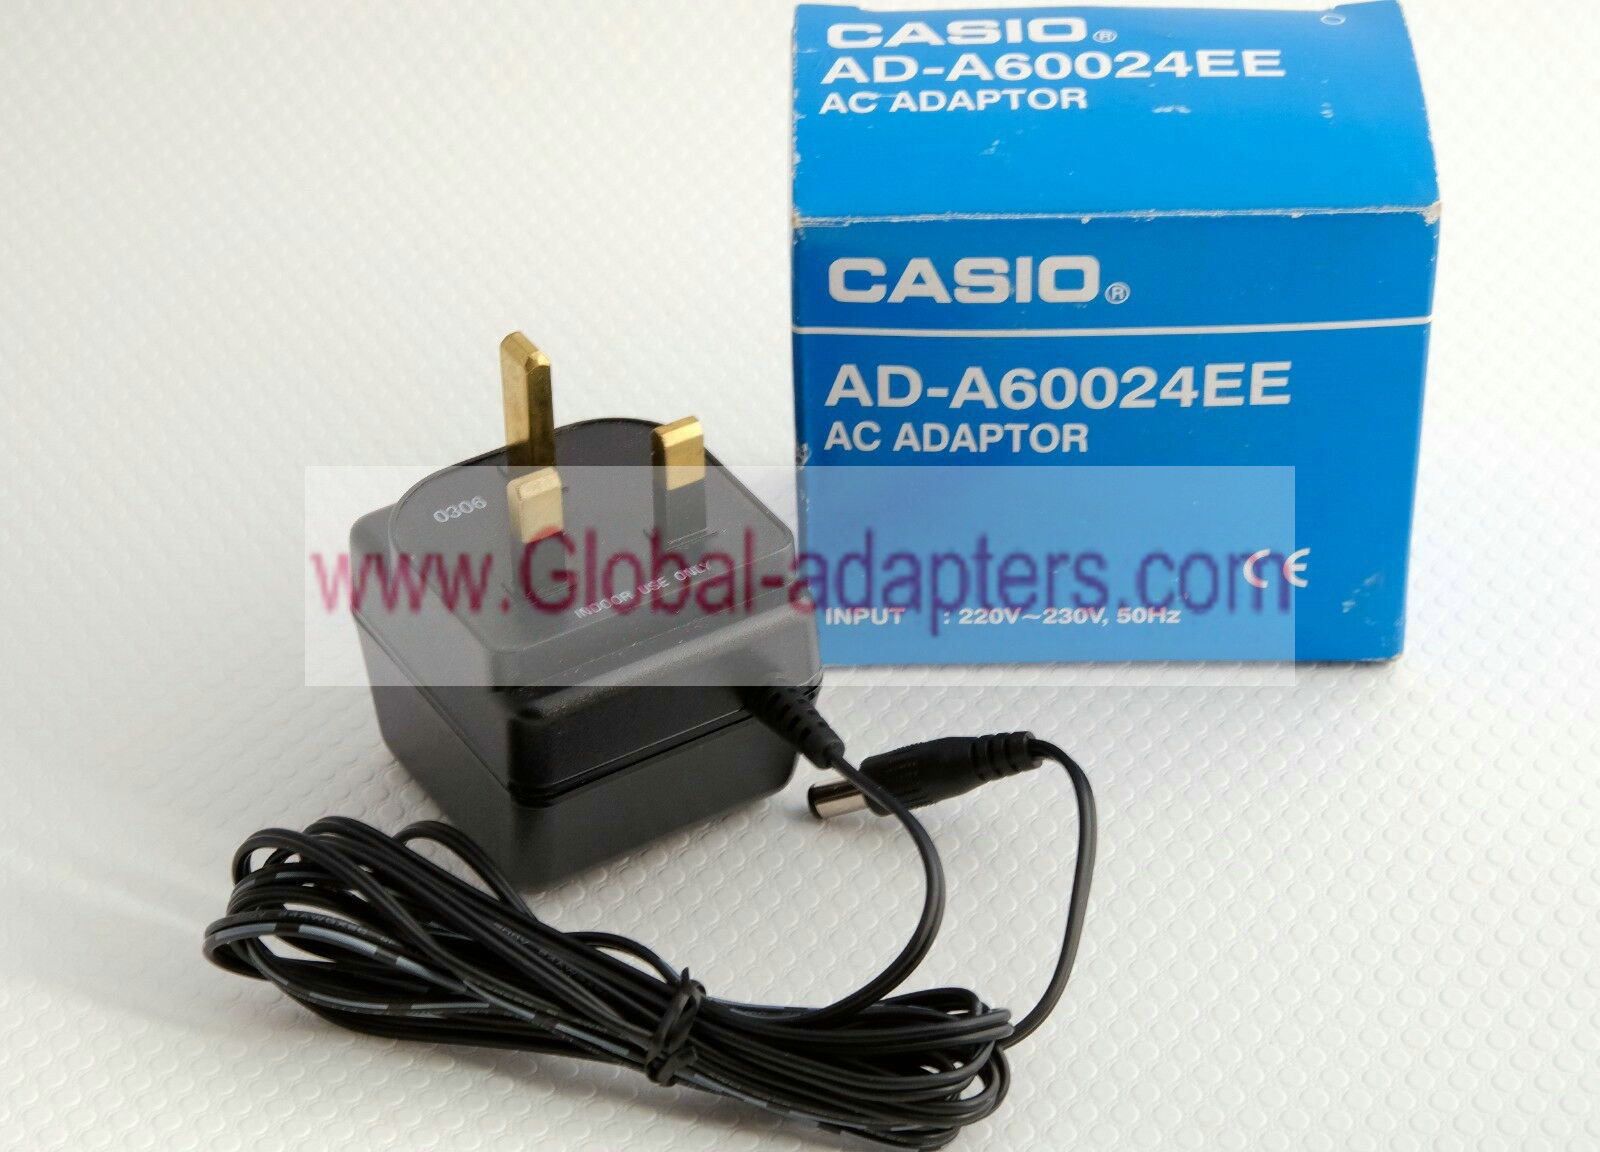 New Casio AD-A60024EE DC 6V 240mA AC Adapter Charger - Click Image to Close